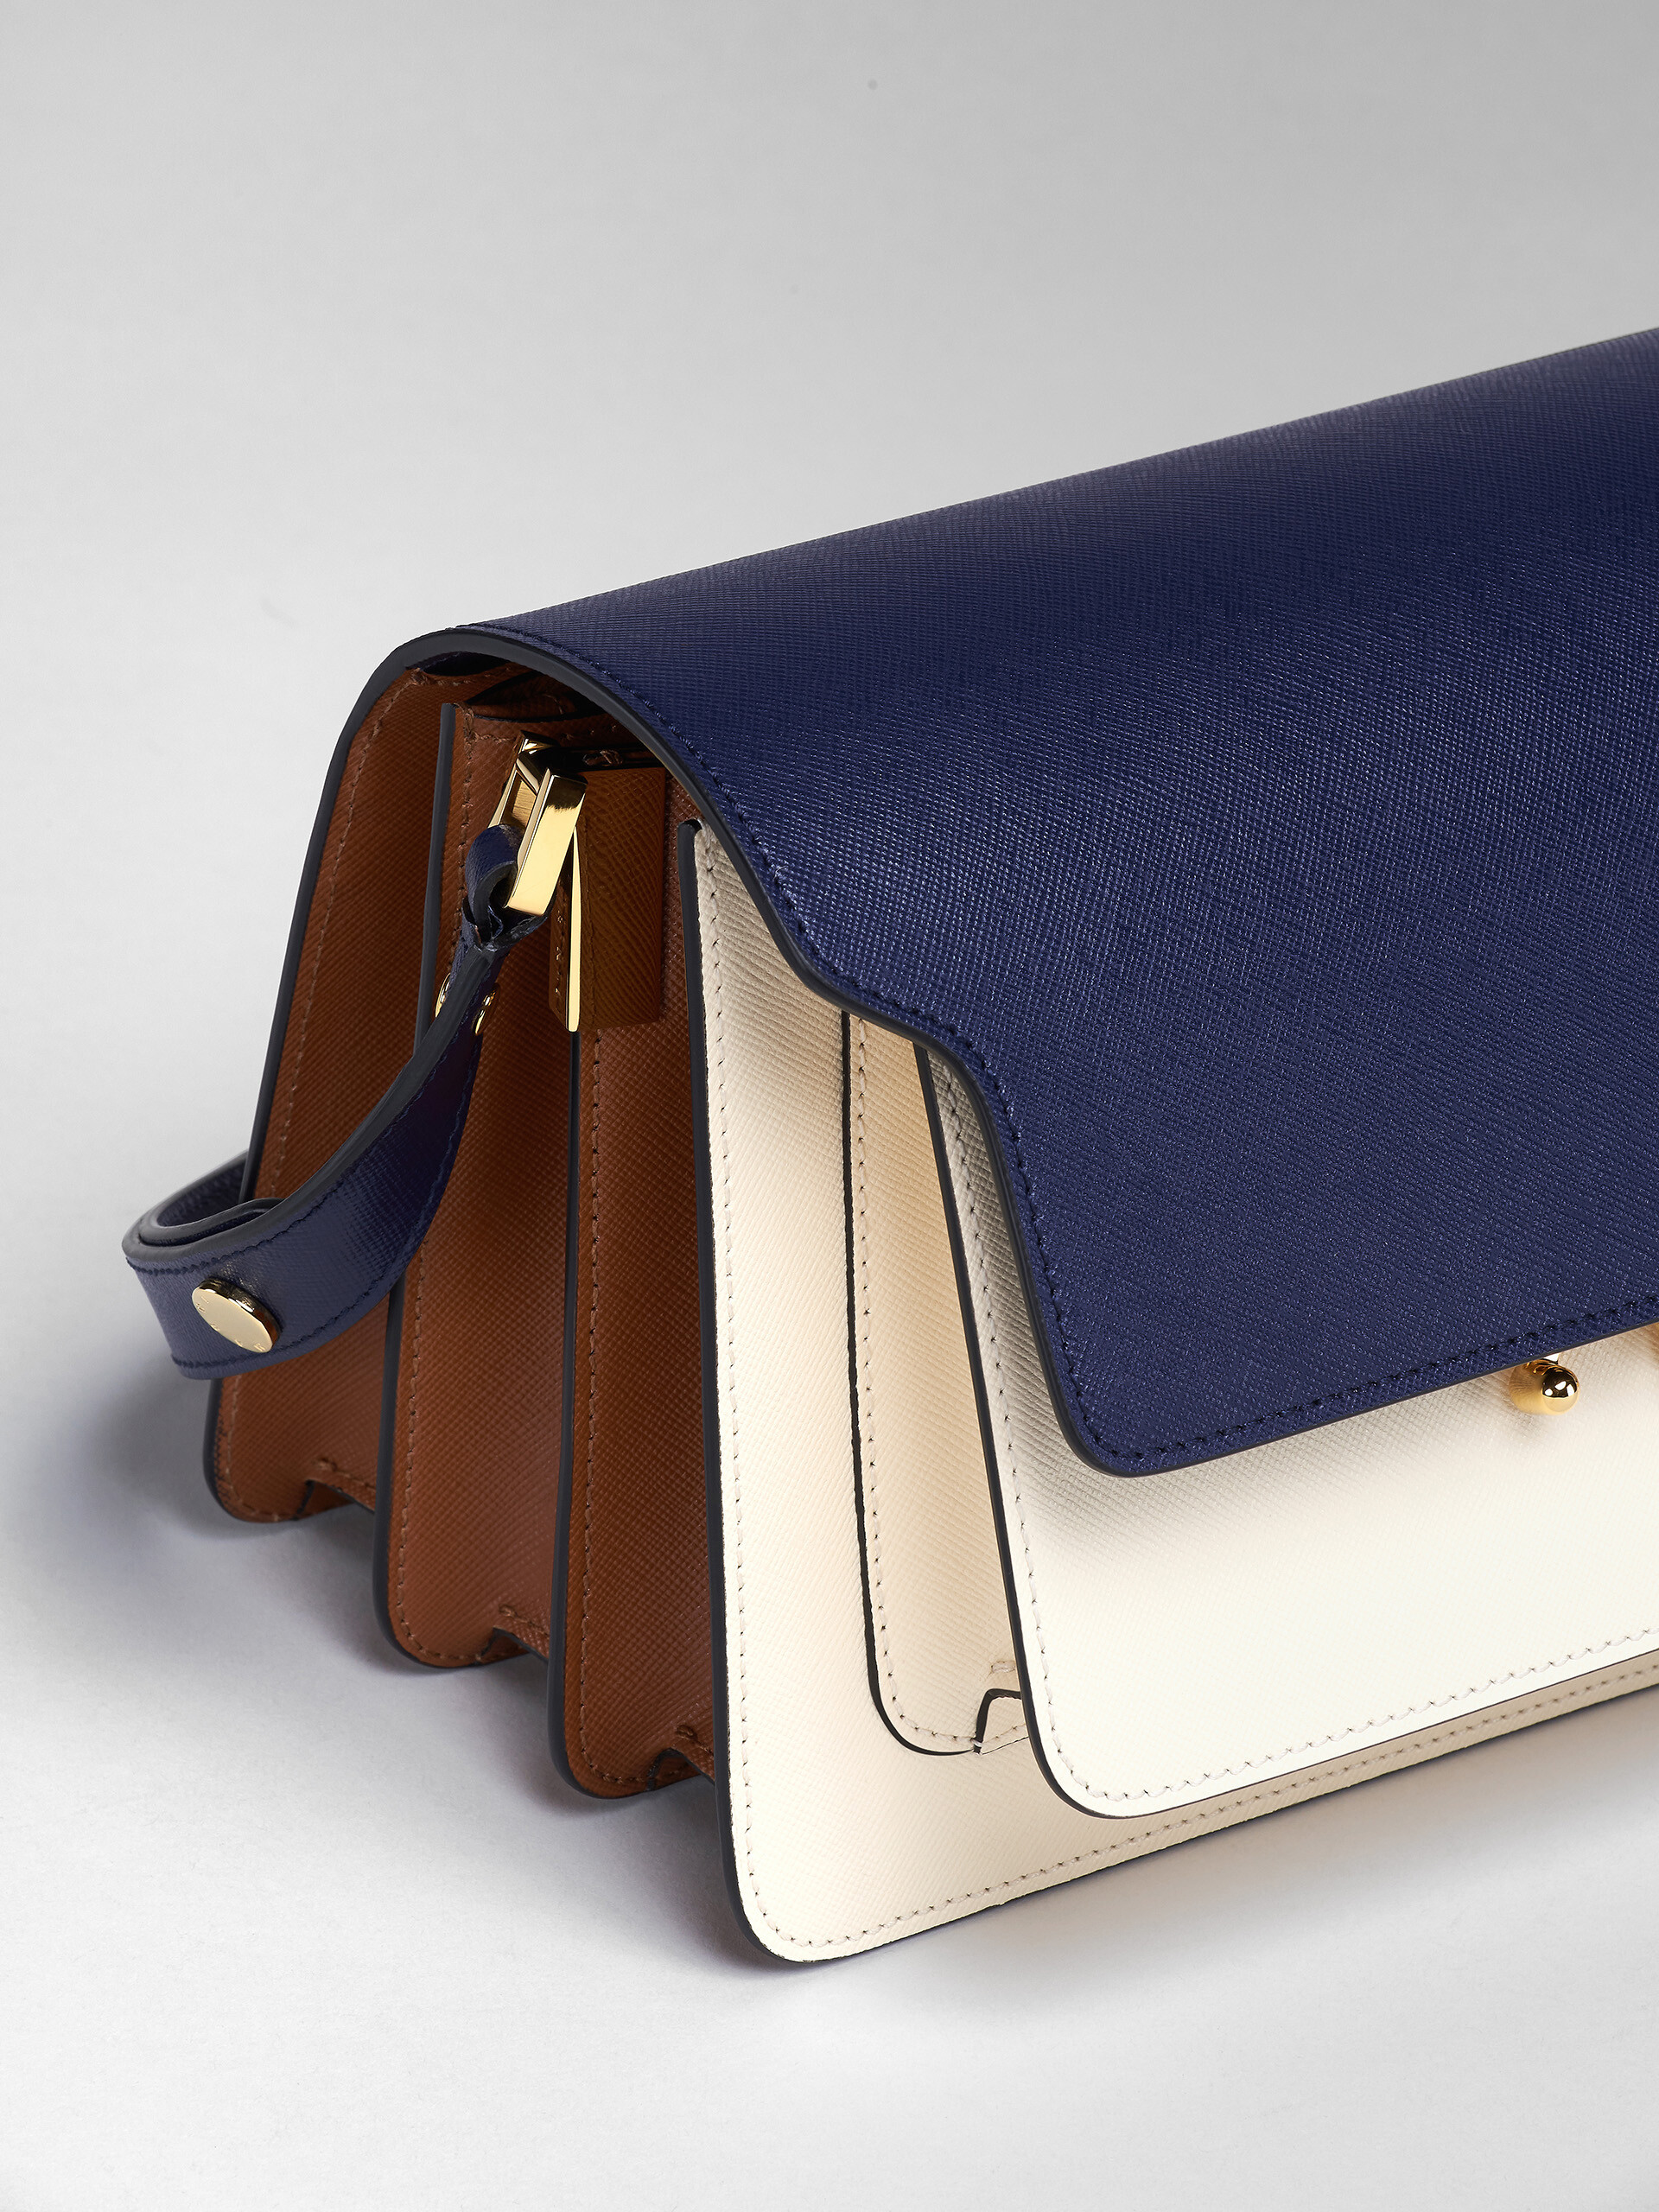 TRUNK medium bag in blue white and brown saffiano leather | Marni